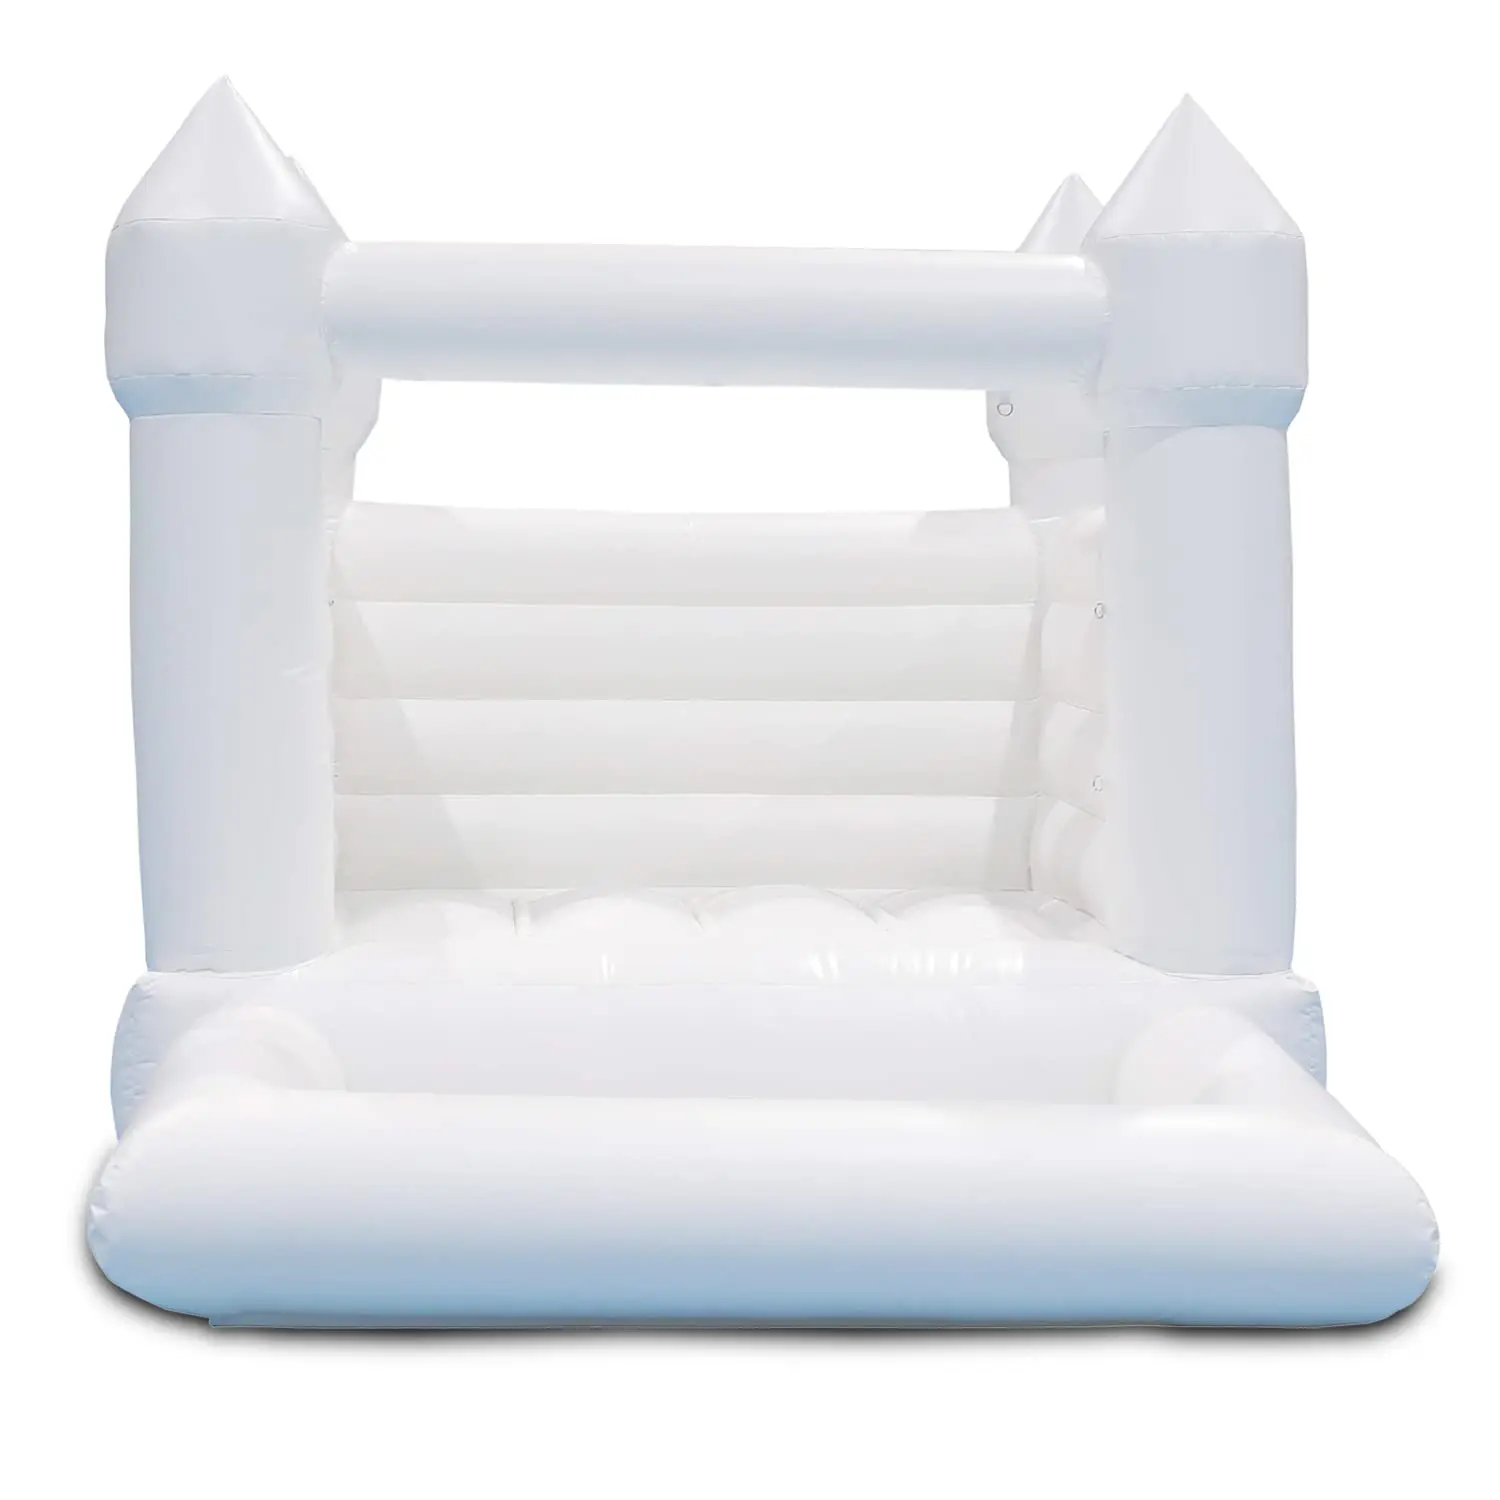 

SAYOK Inflatable White Bounce House Castle with Ball Pit, Inflatable Bouncy Castle Jumping Bed for Wedding/Birthday/Party/Event